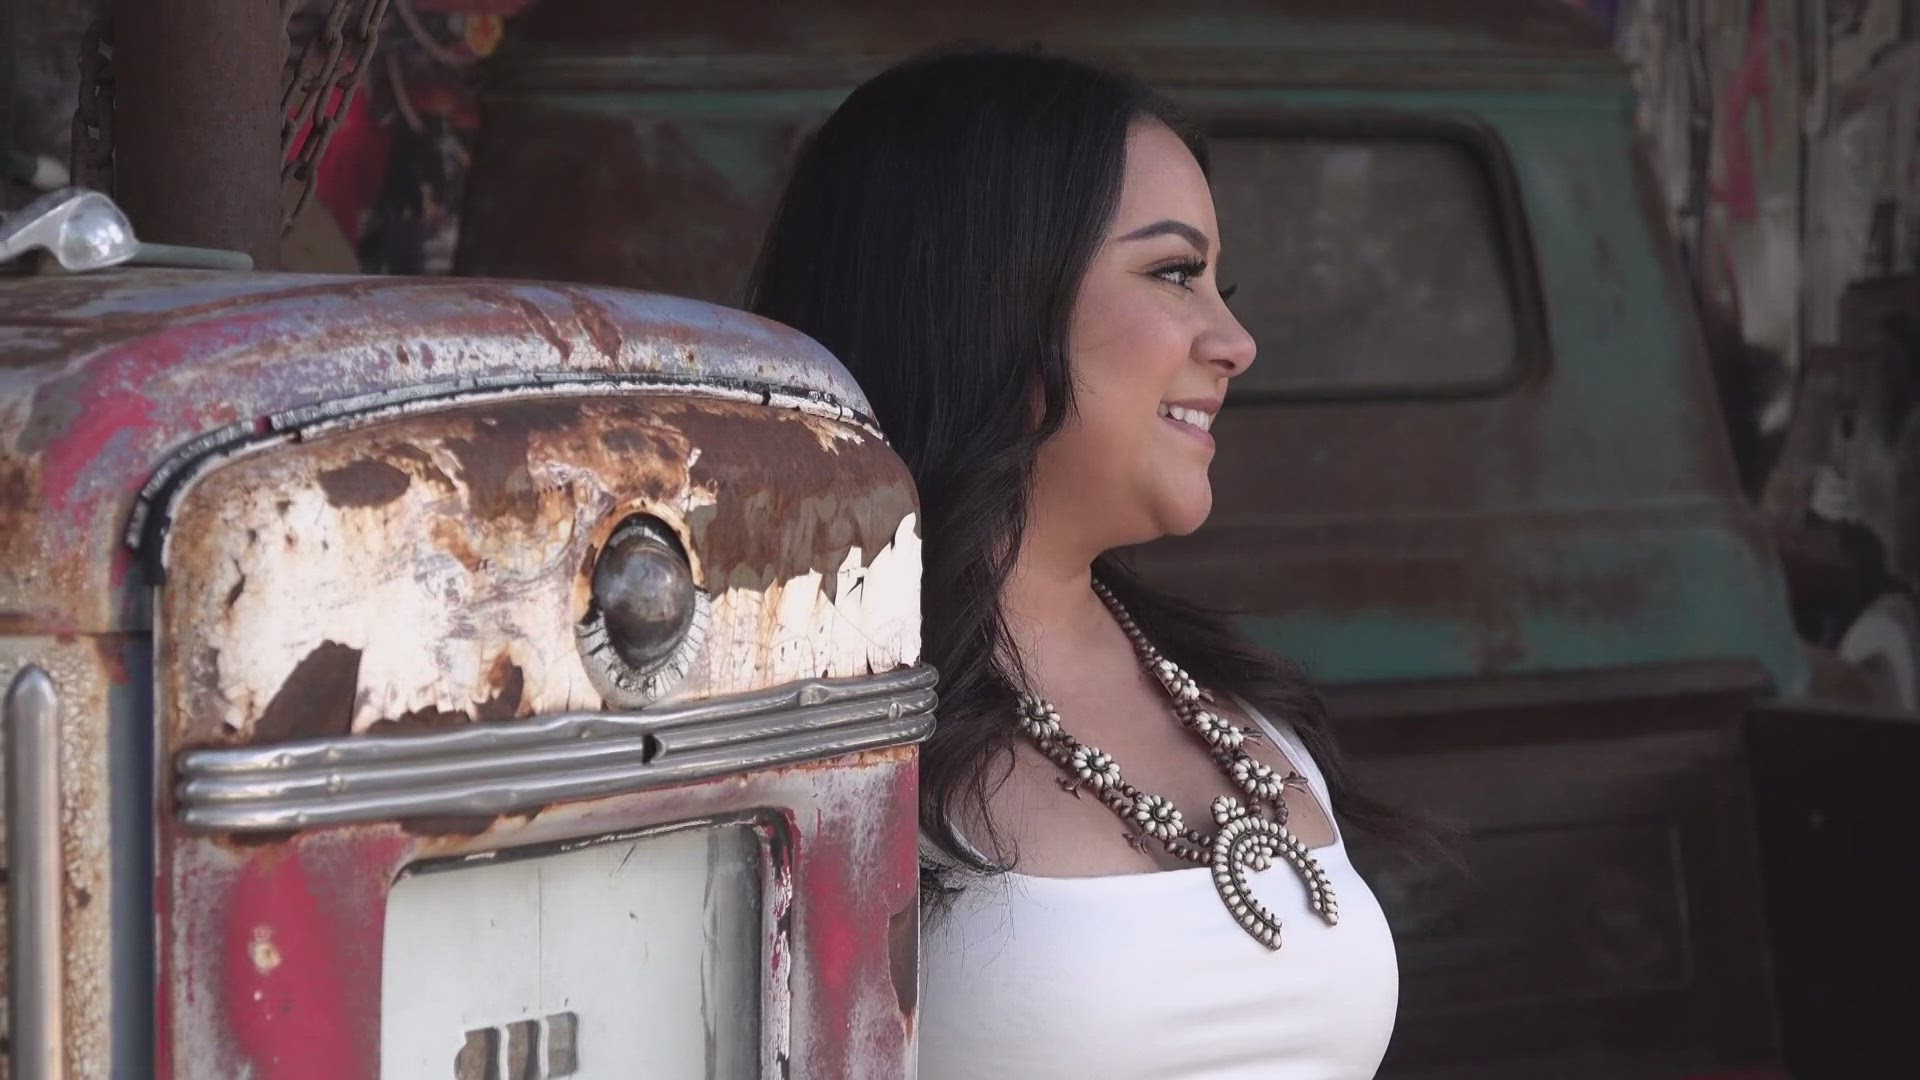 Local Midland Tejano artist Joanna Rae talks about her experience working in the industry.